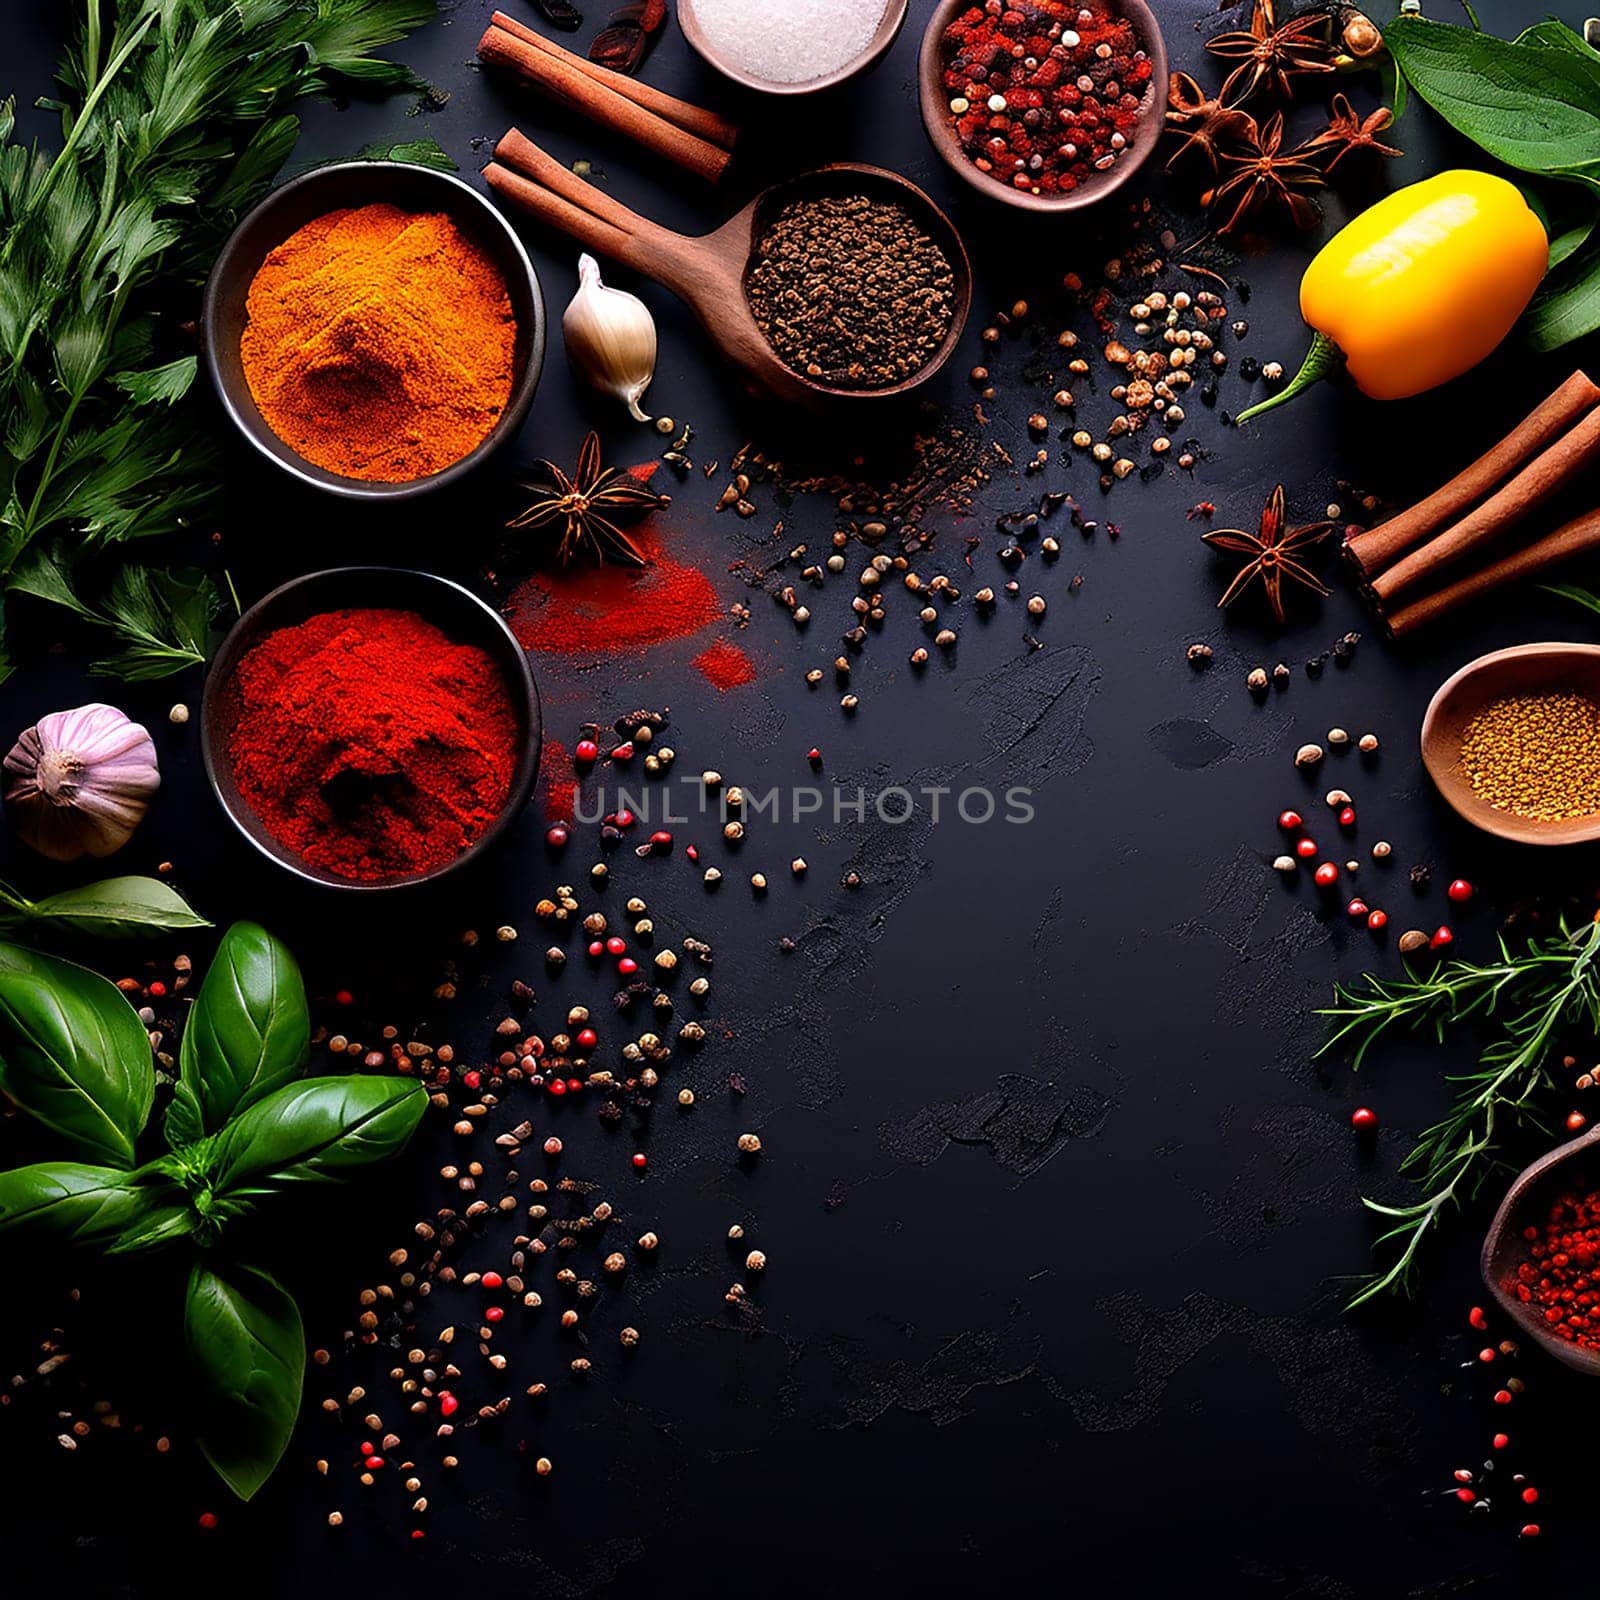 Gourmet Seasonings: Colorful Herbs and Spices for Culinary Creations